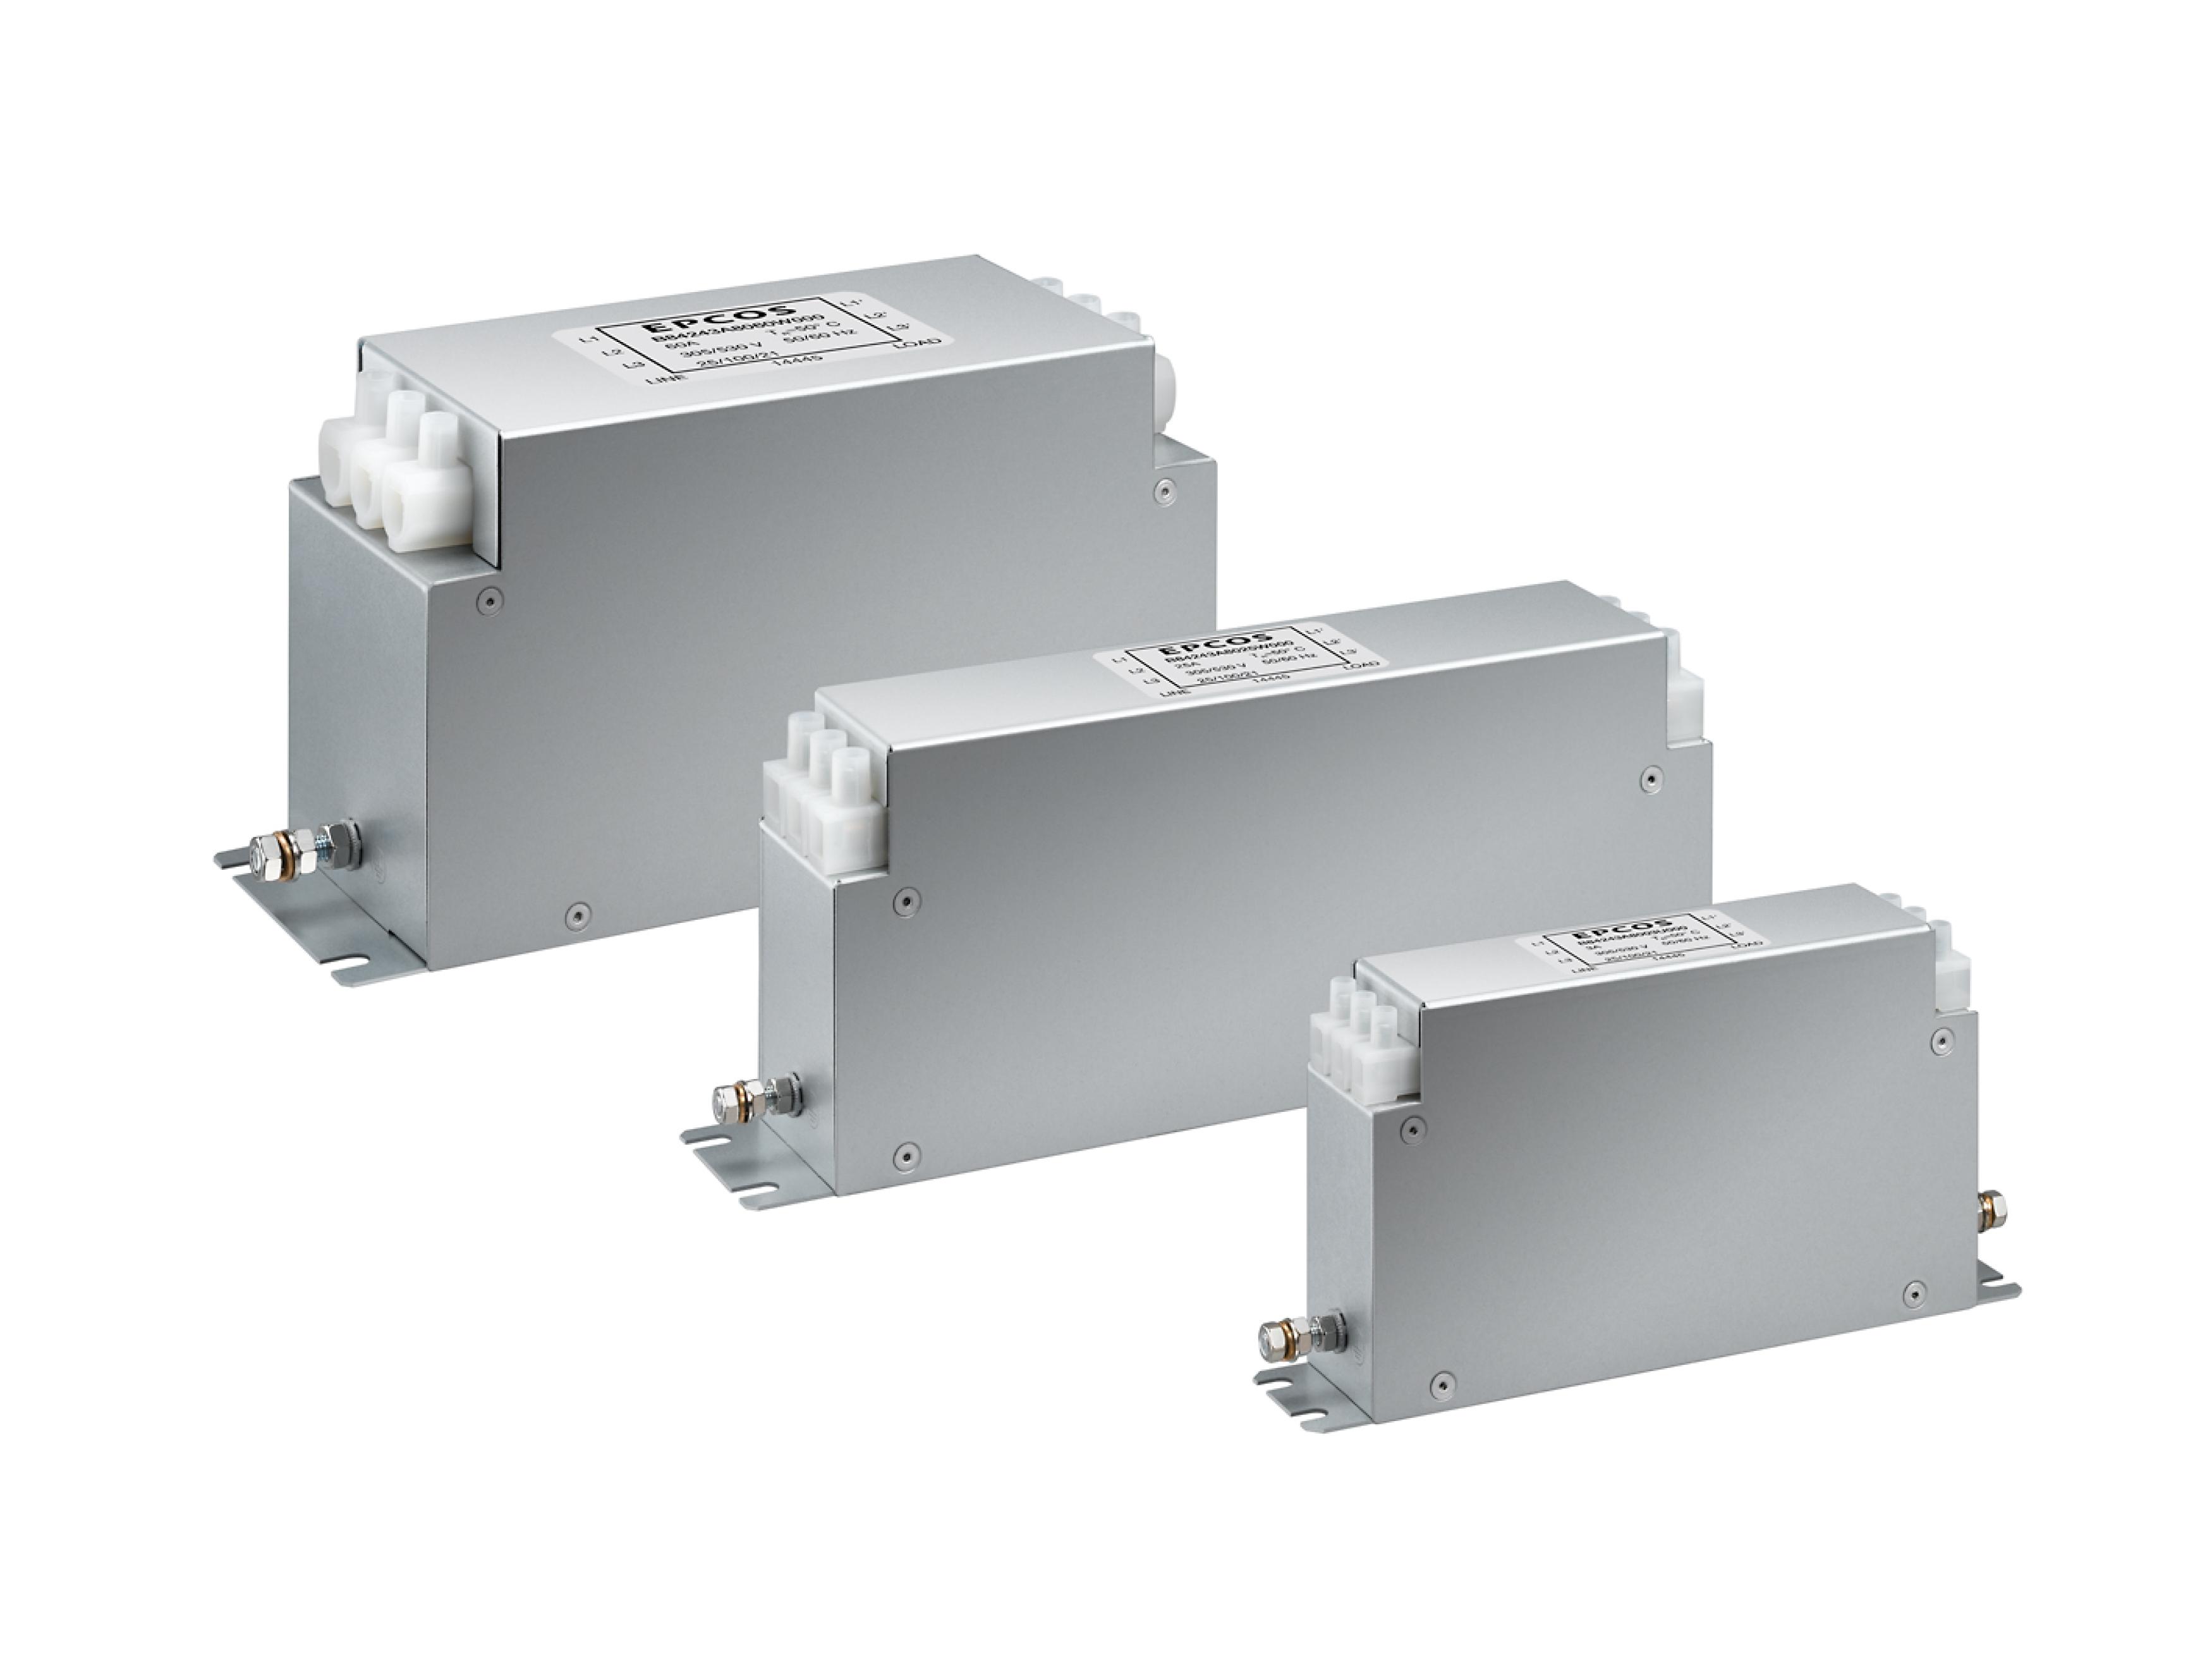 3-line EMC Filters Satisfy Current Requirements up to 280 A